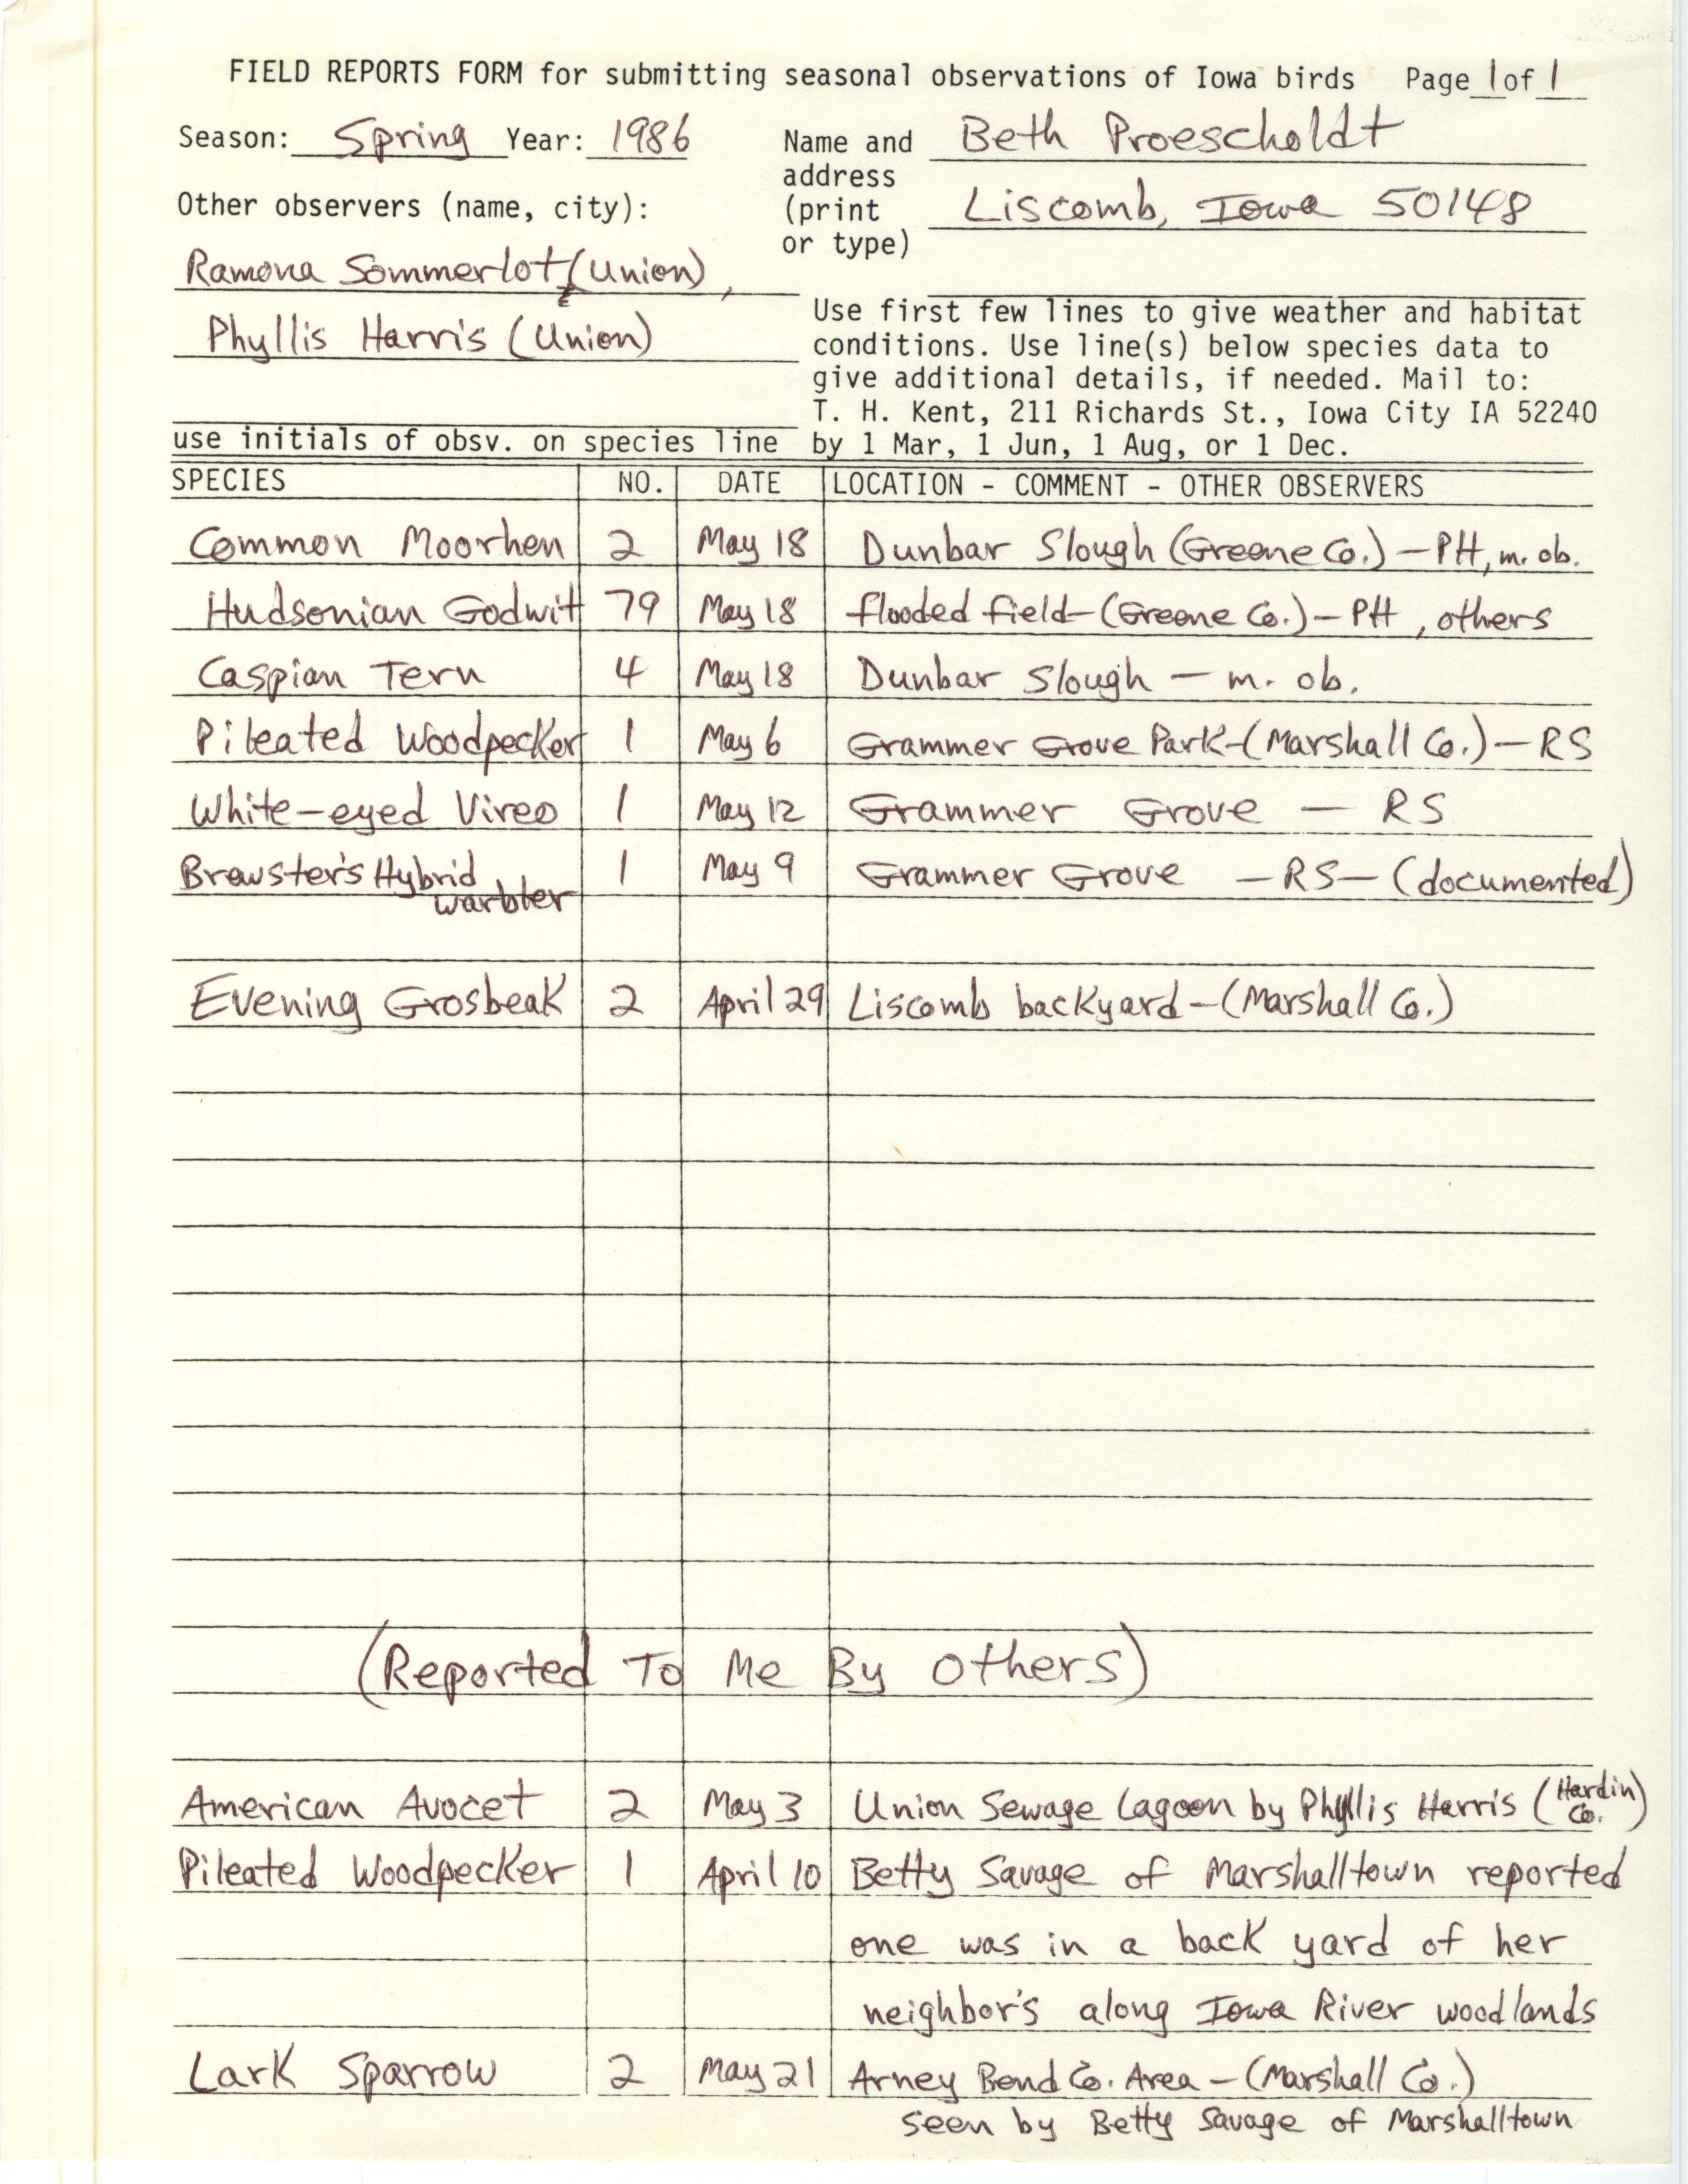 Field reports form for submitting seasonal observations of Iowa birds, Beth Proescholdt, Spring 1986